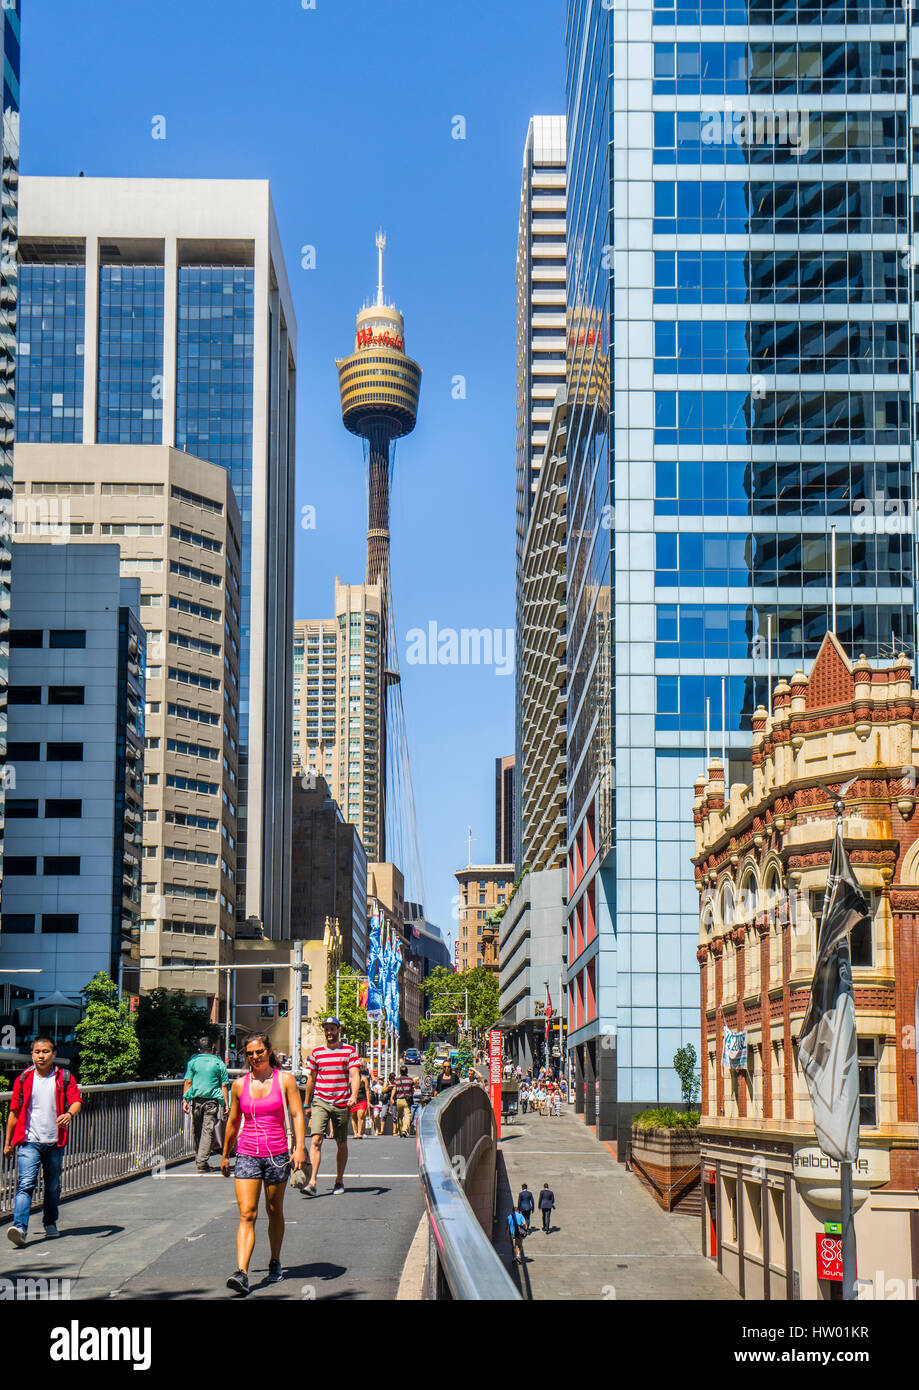 Australia, New South Wales, Sydney, city view from the pedestrian bridge connecting Pyrmont Bridge with Market Street, with the view of BT Tower and S Stock Photo